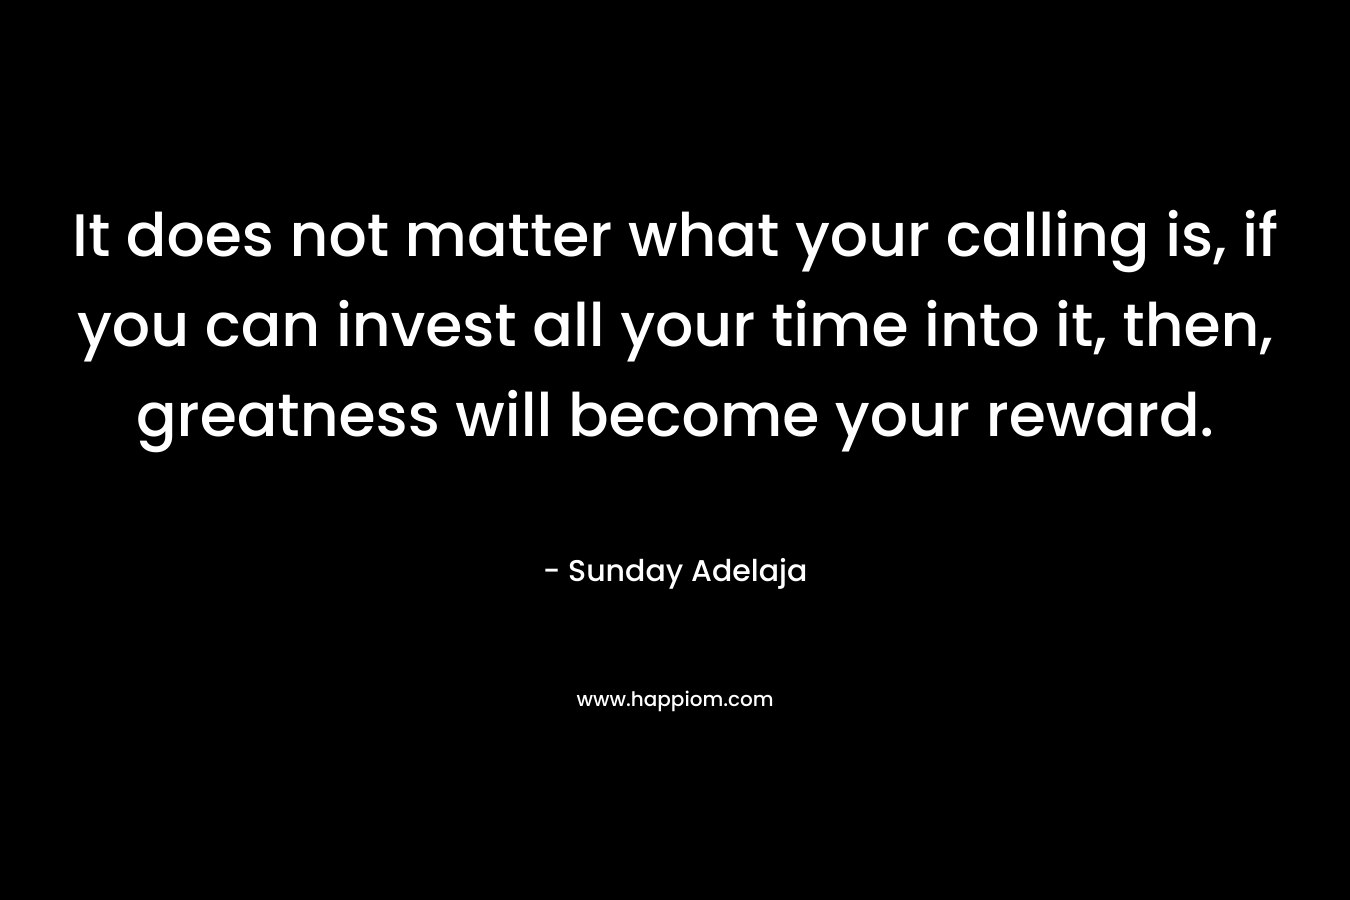 It does not matter what your calling is, if you can invest all your time into it, then, greatness will become your reward.